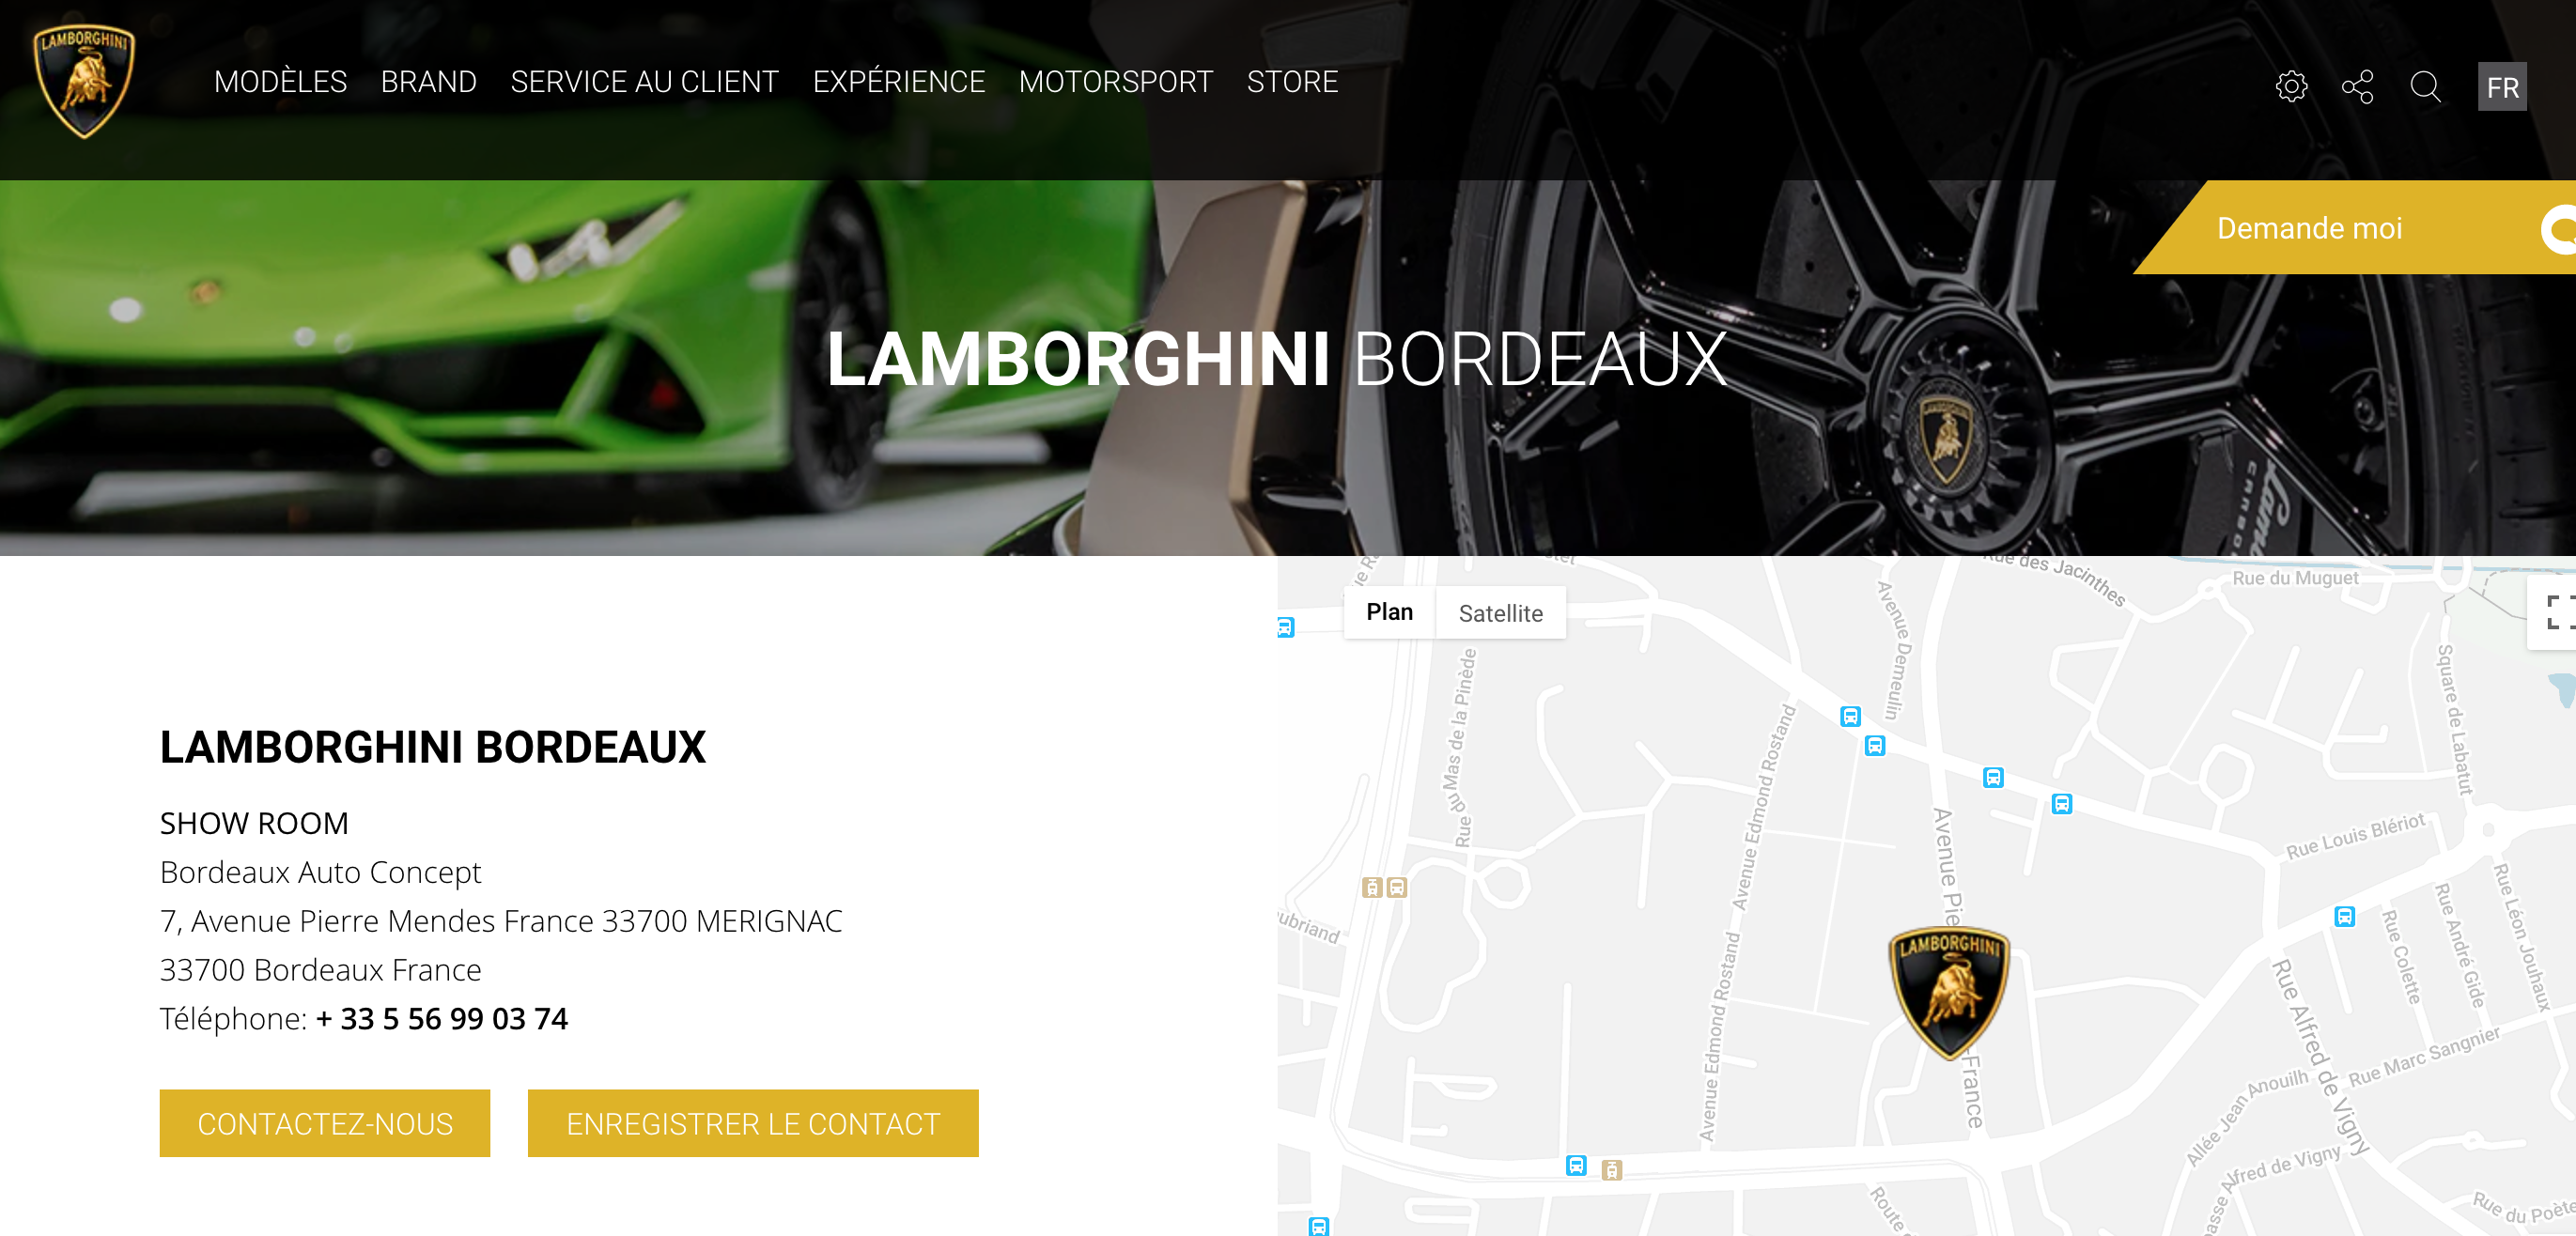  A portal page specifically for the Bordeaux Lamborghini dealers.